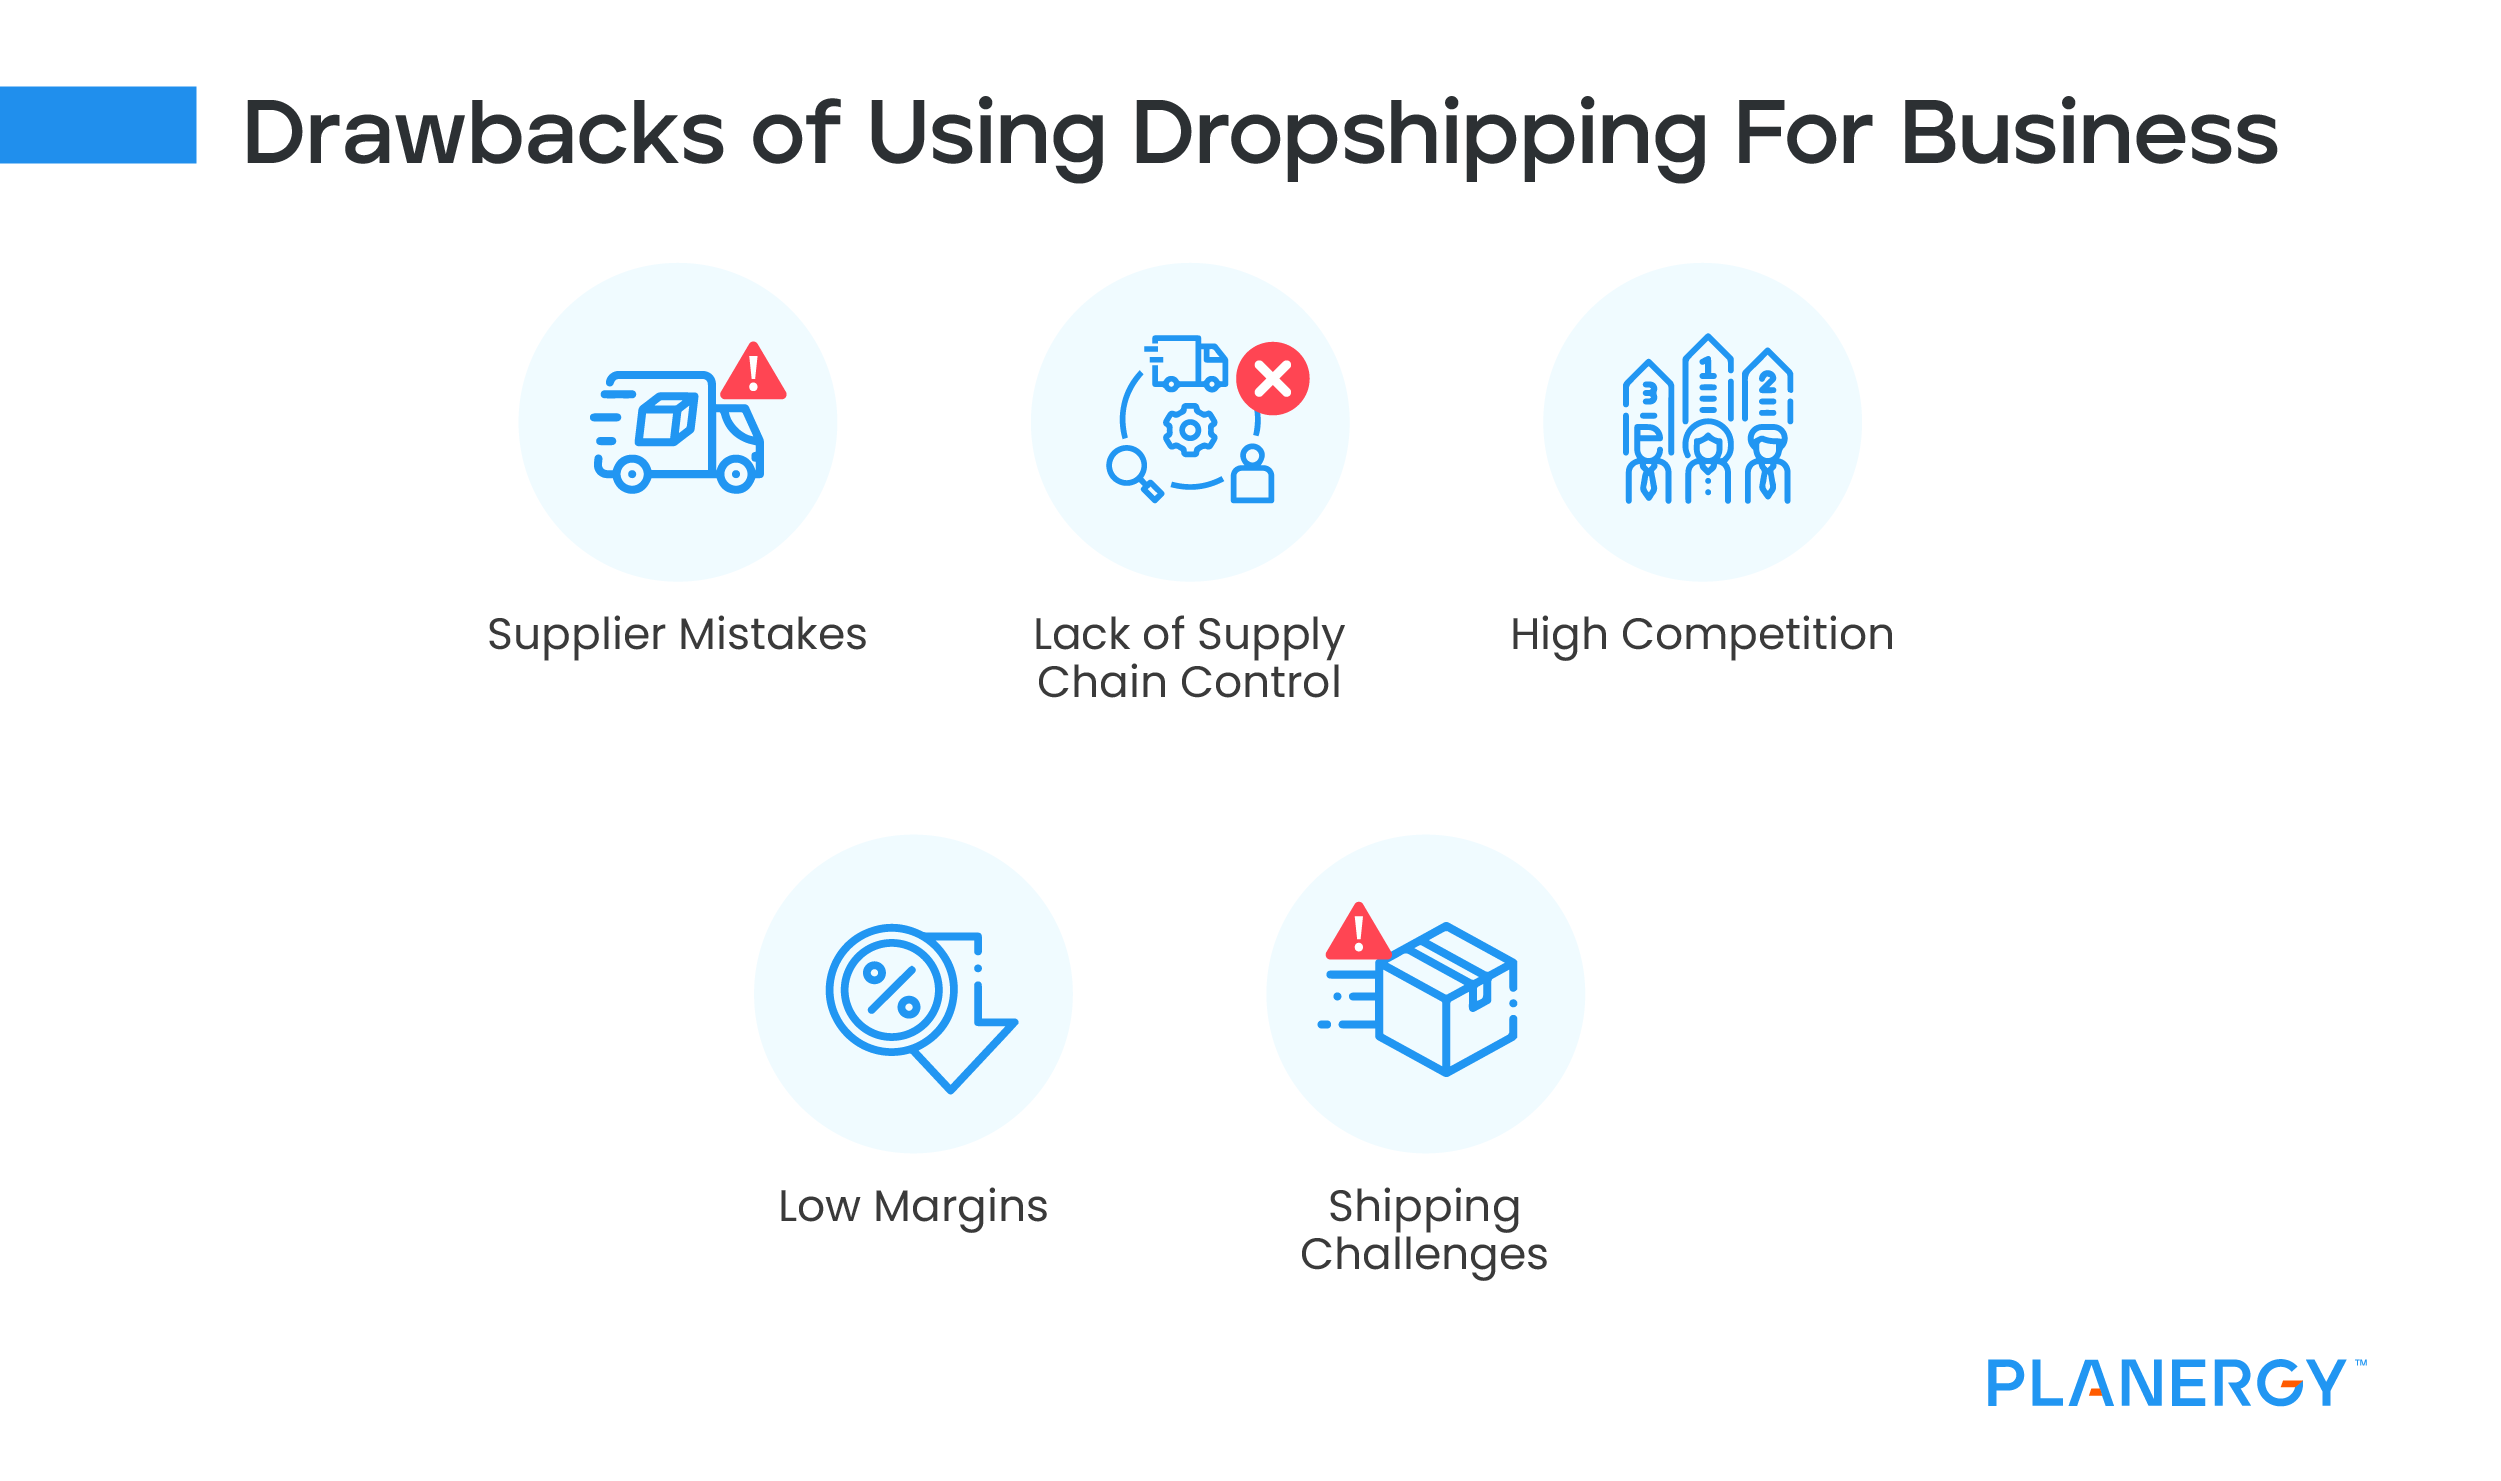 Drawbacks of Using Dropshipping for Business